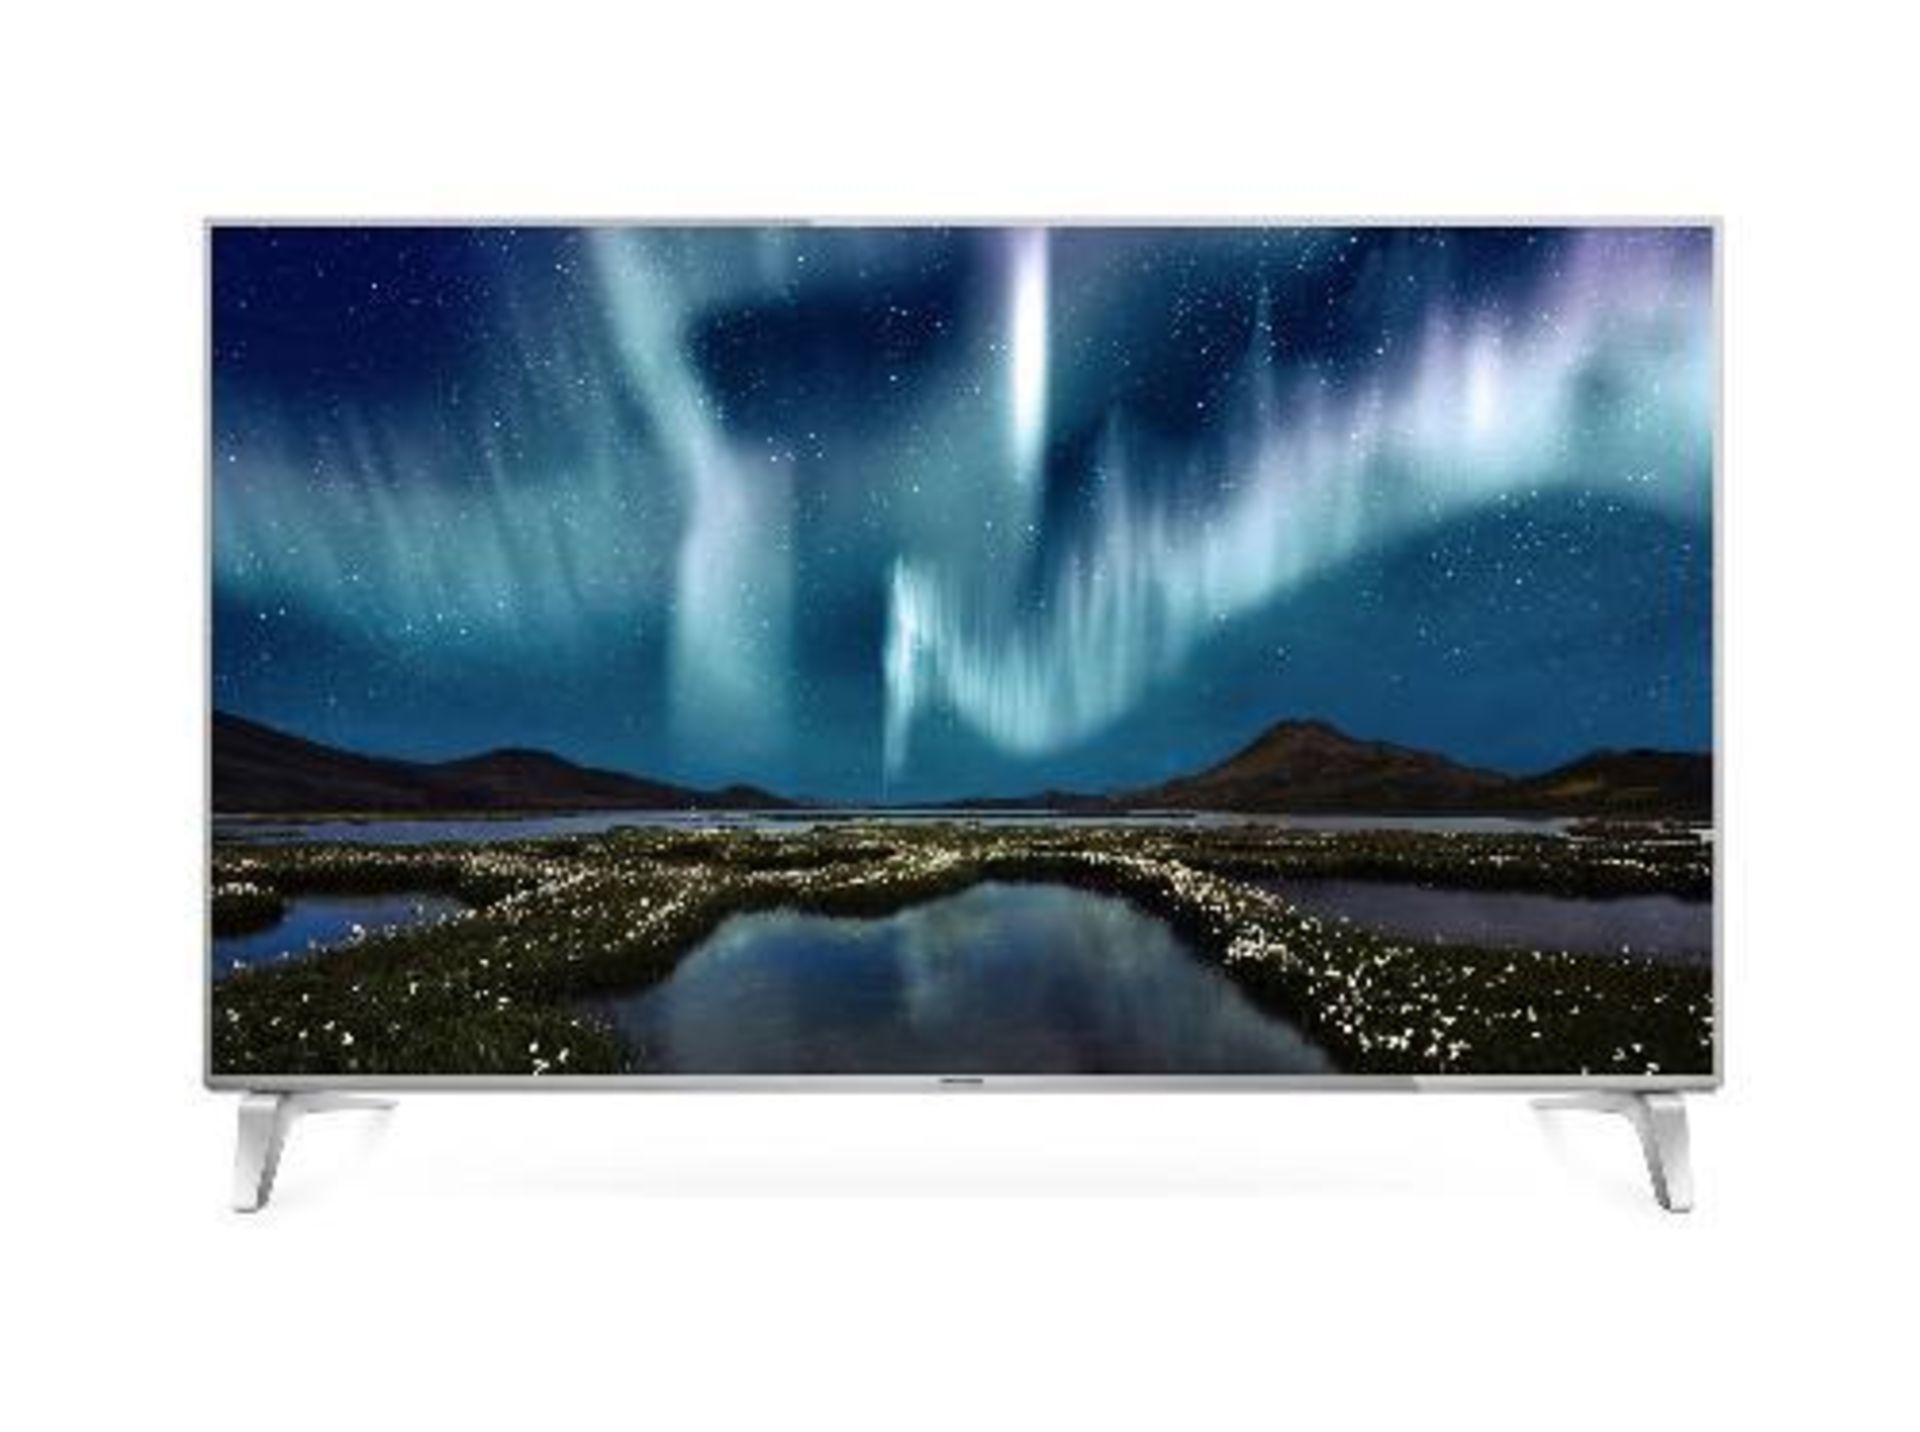 1 SHARP 49" 4K UHD 2160P SMART LED TV WITH FREEVIEW HD LC-49CUG8052K WITH REMOTE AND STAND RRP Â£399